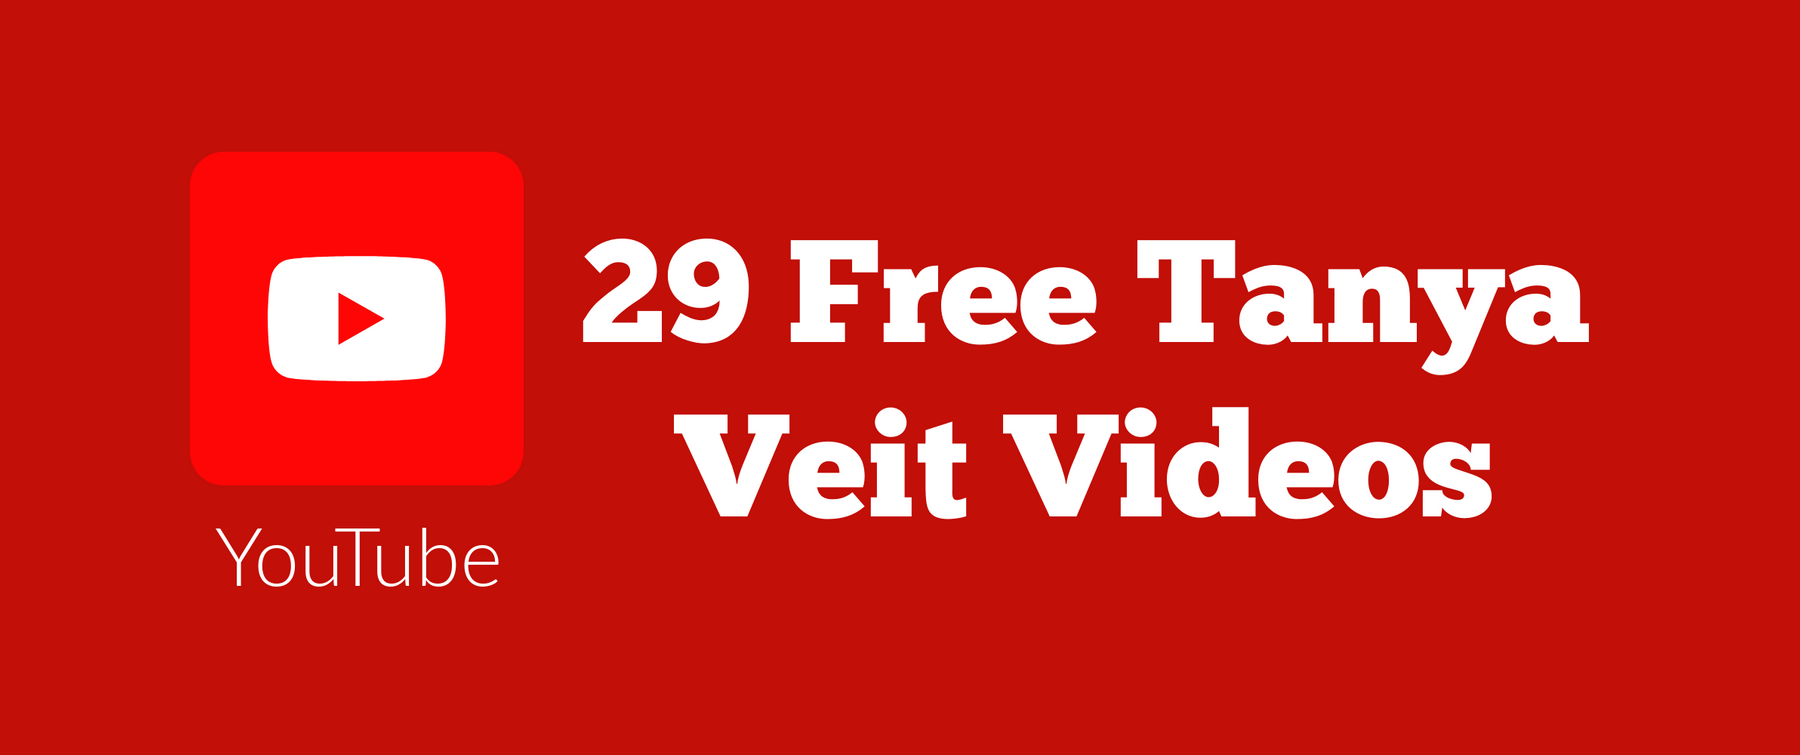 29 Free Videos All in One Email